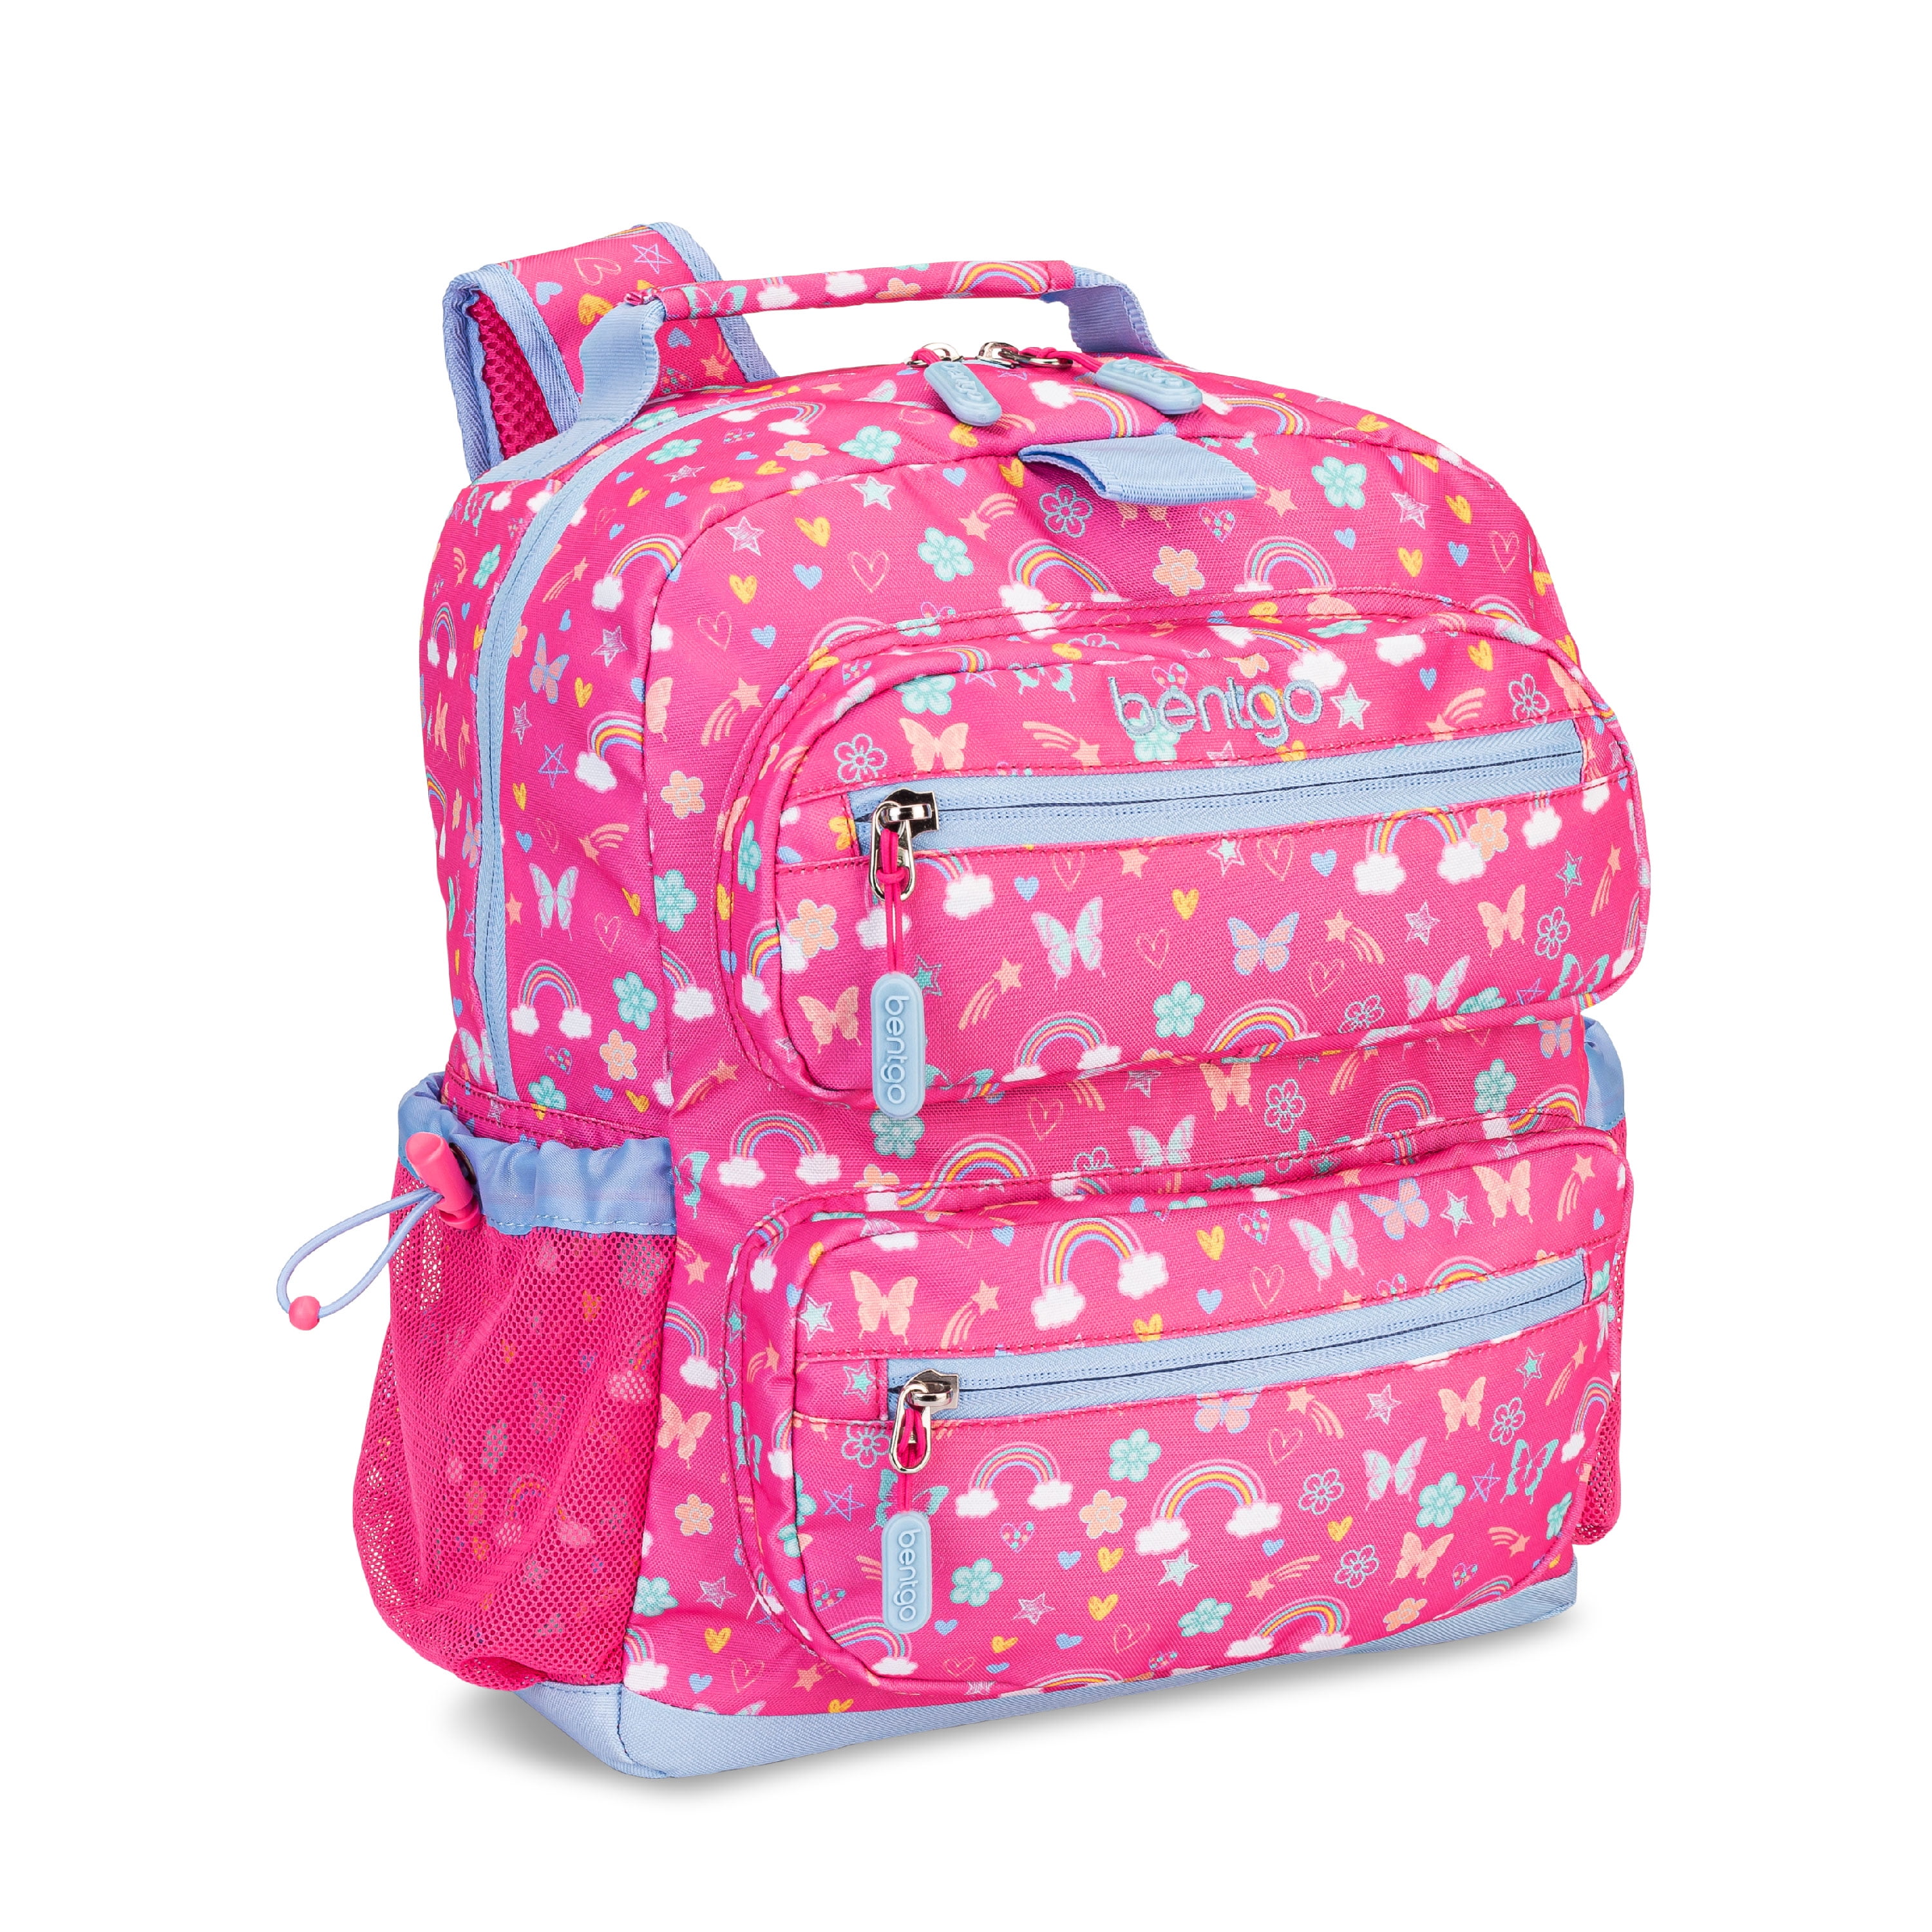 Bentgo® Kids Backpack - Lightweight 14” Backpack in Unique Prints for  School, Travel, & Daycare - Roomy Interior, Durable & Water-Resistant  Fabric, & Loop for Lunch Bag (Shark) 